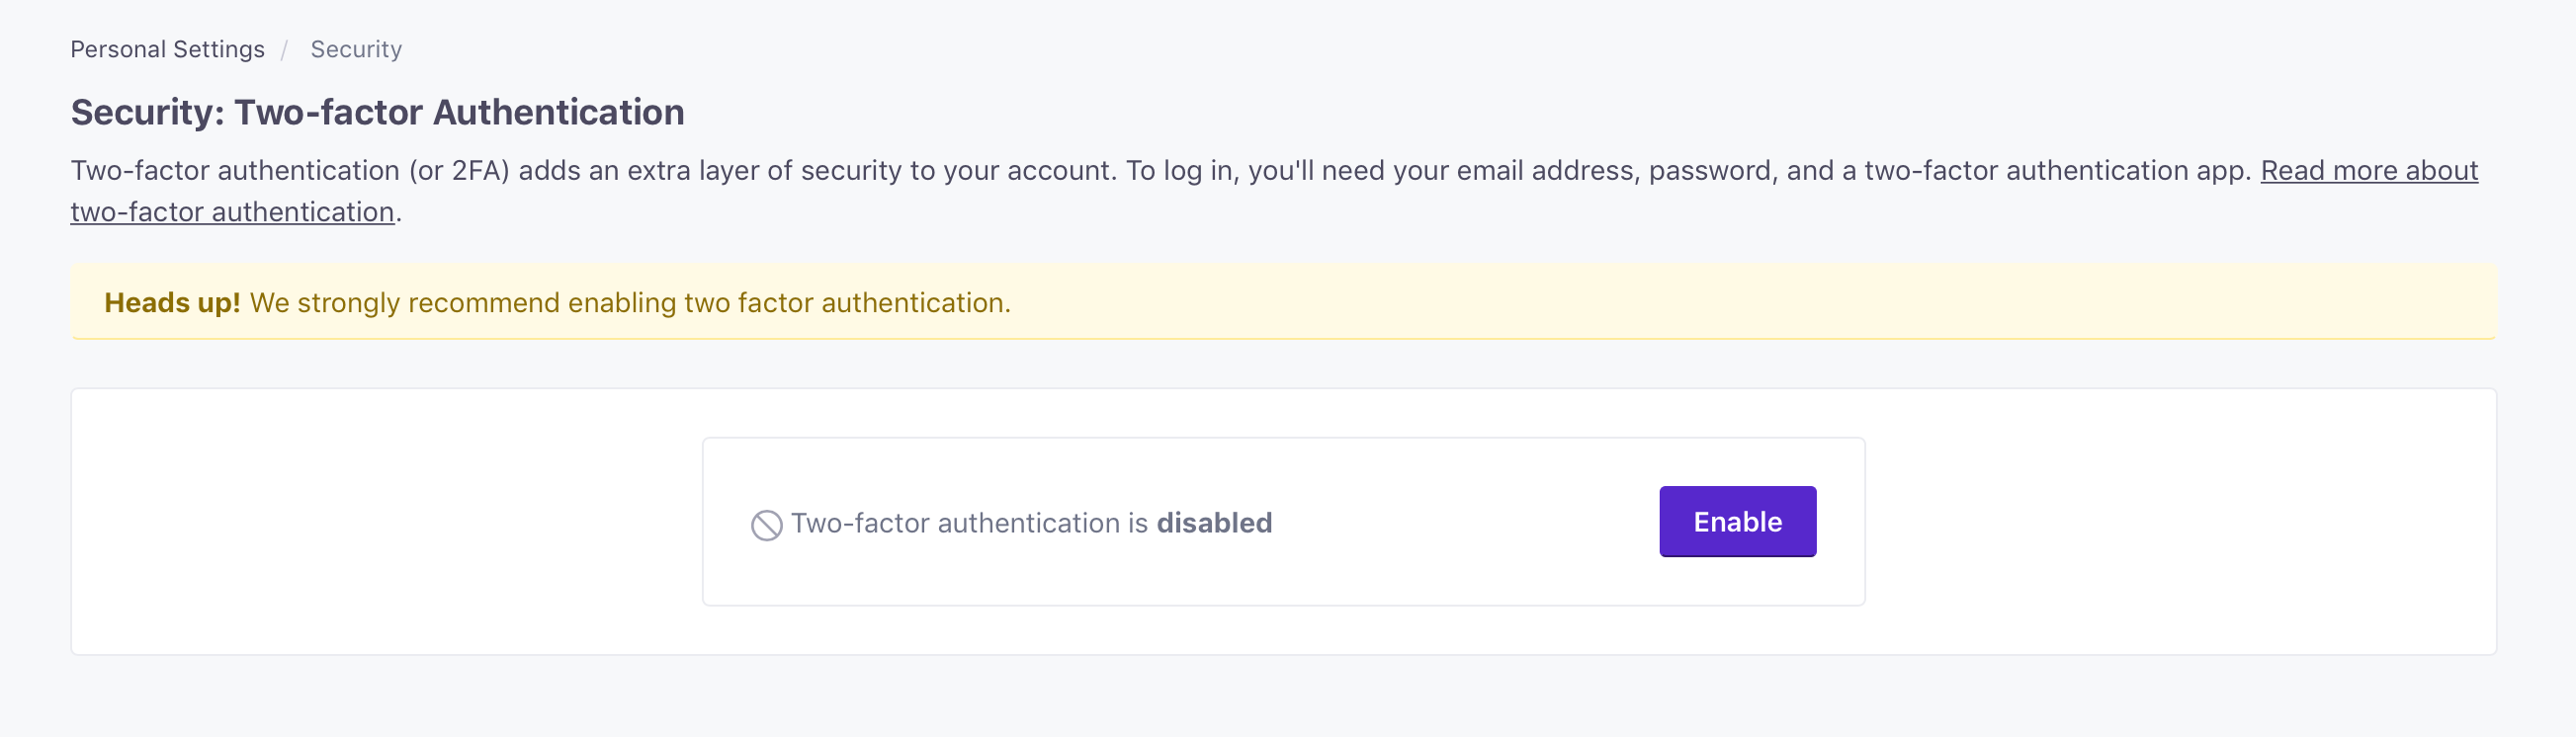 Two-factor Authentication disabled